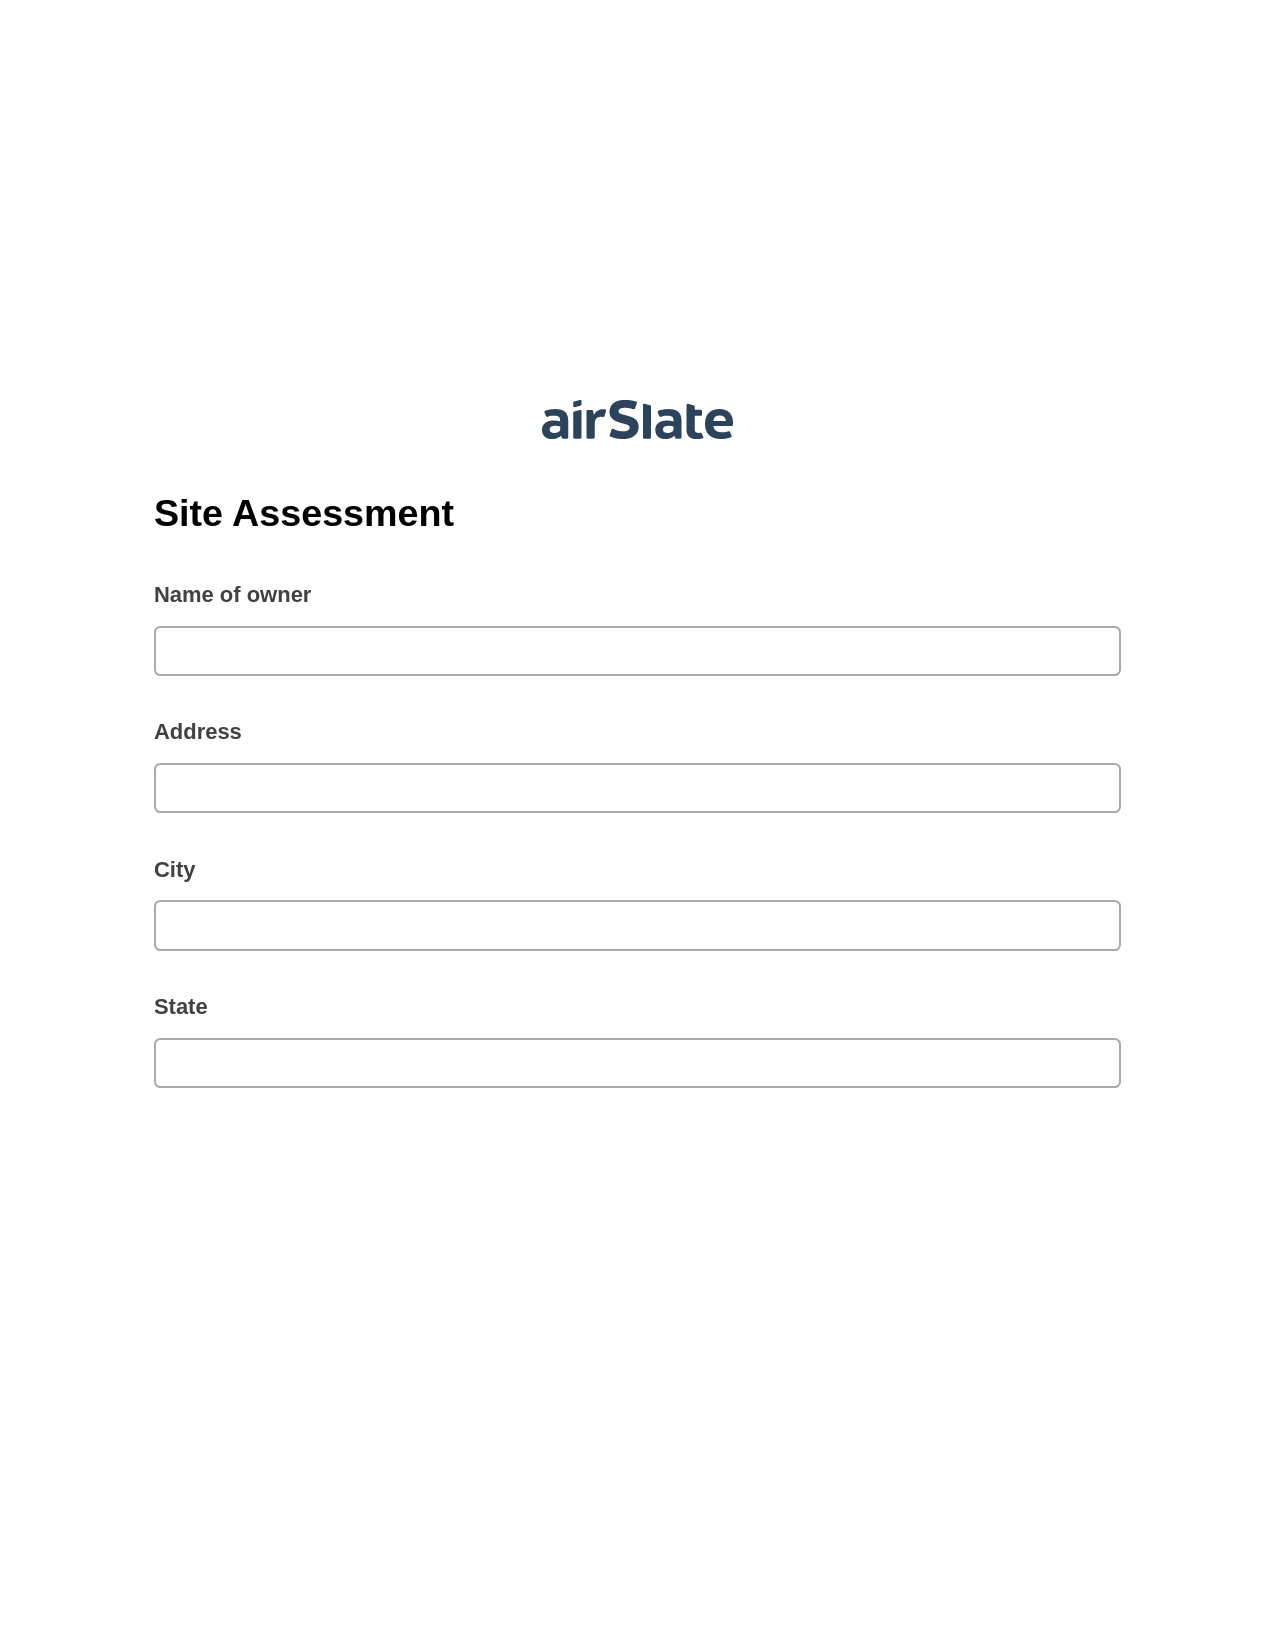 Site Assessment Pre-fill from Excel Spreadsheet Bot, System Bot - Create a Slate in another Flow, Google Drive Bot